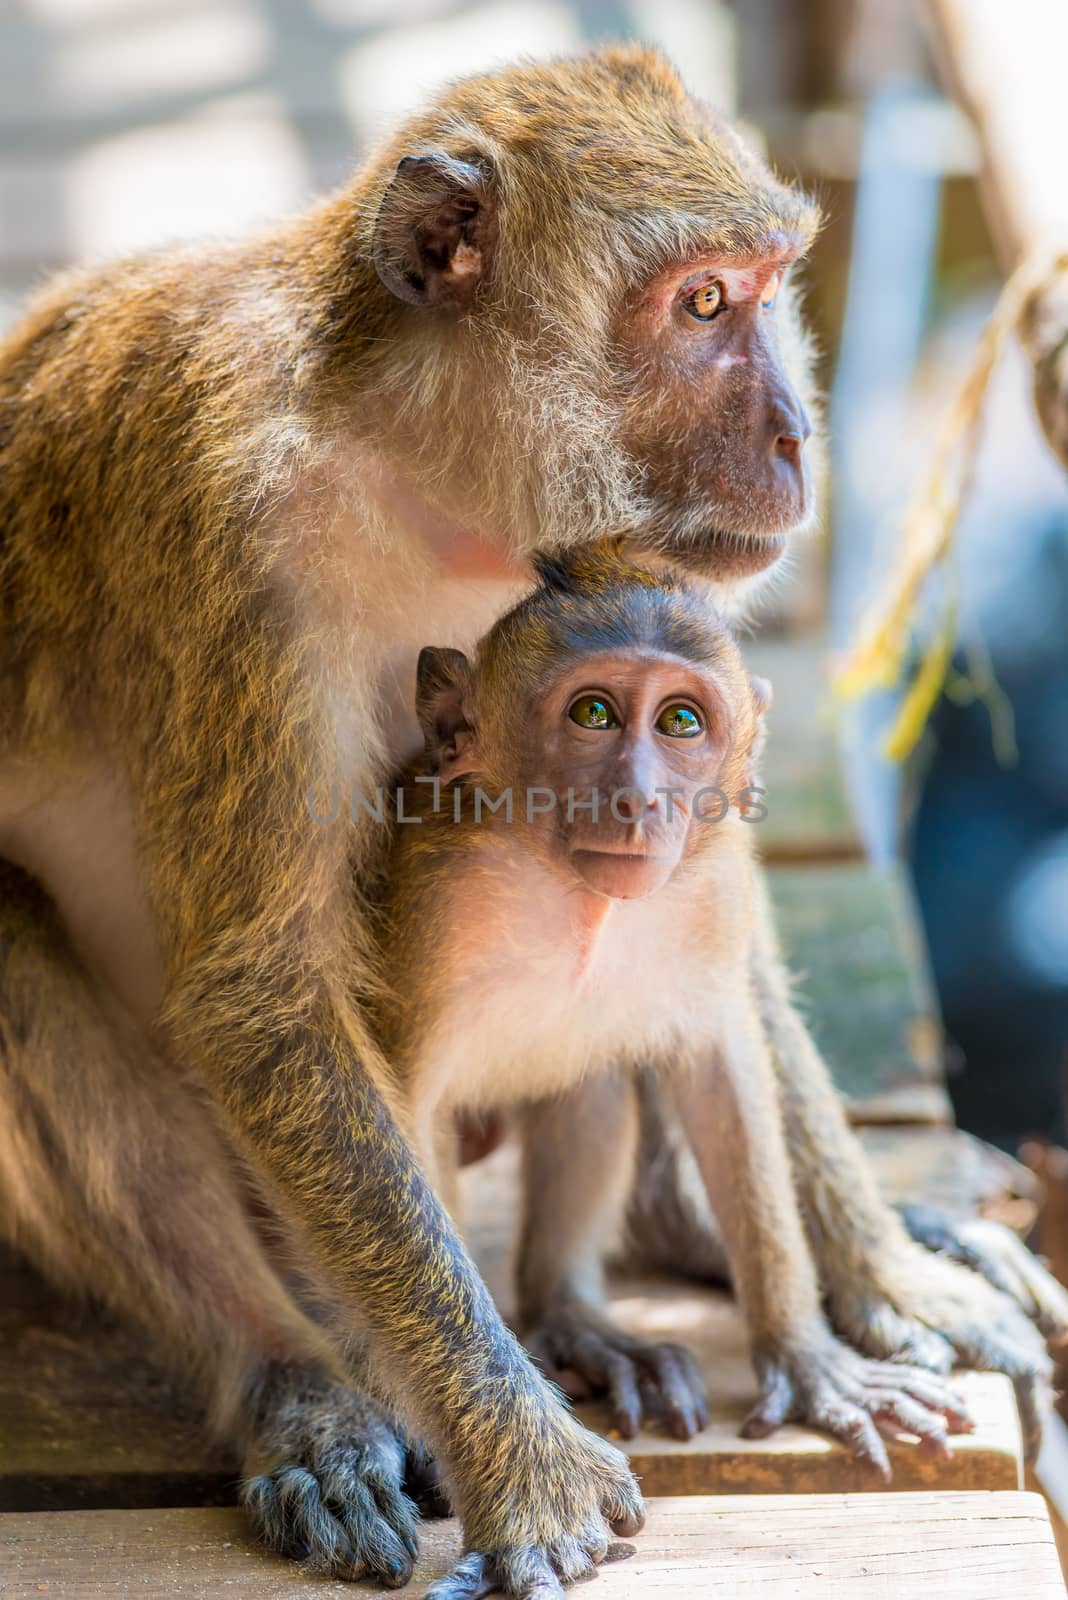 little baby and his mom bask in the sun, Thailand